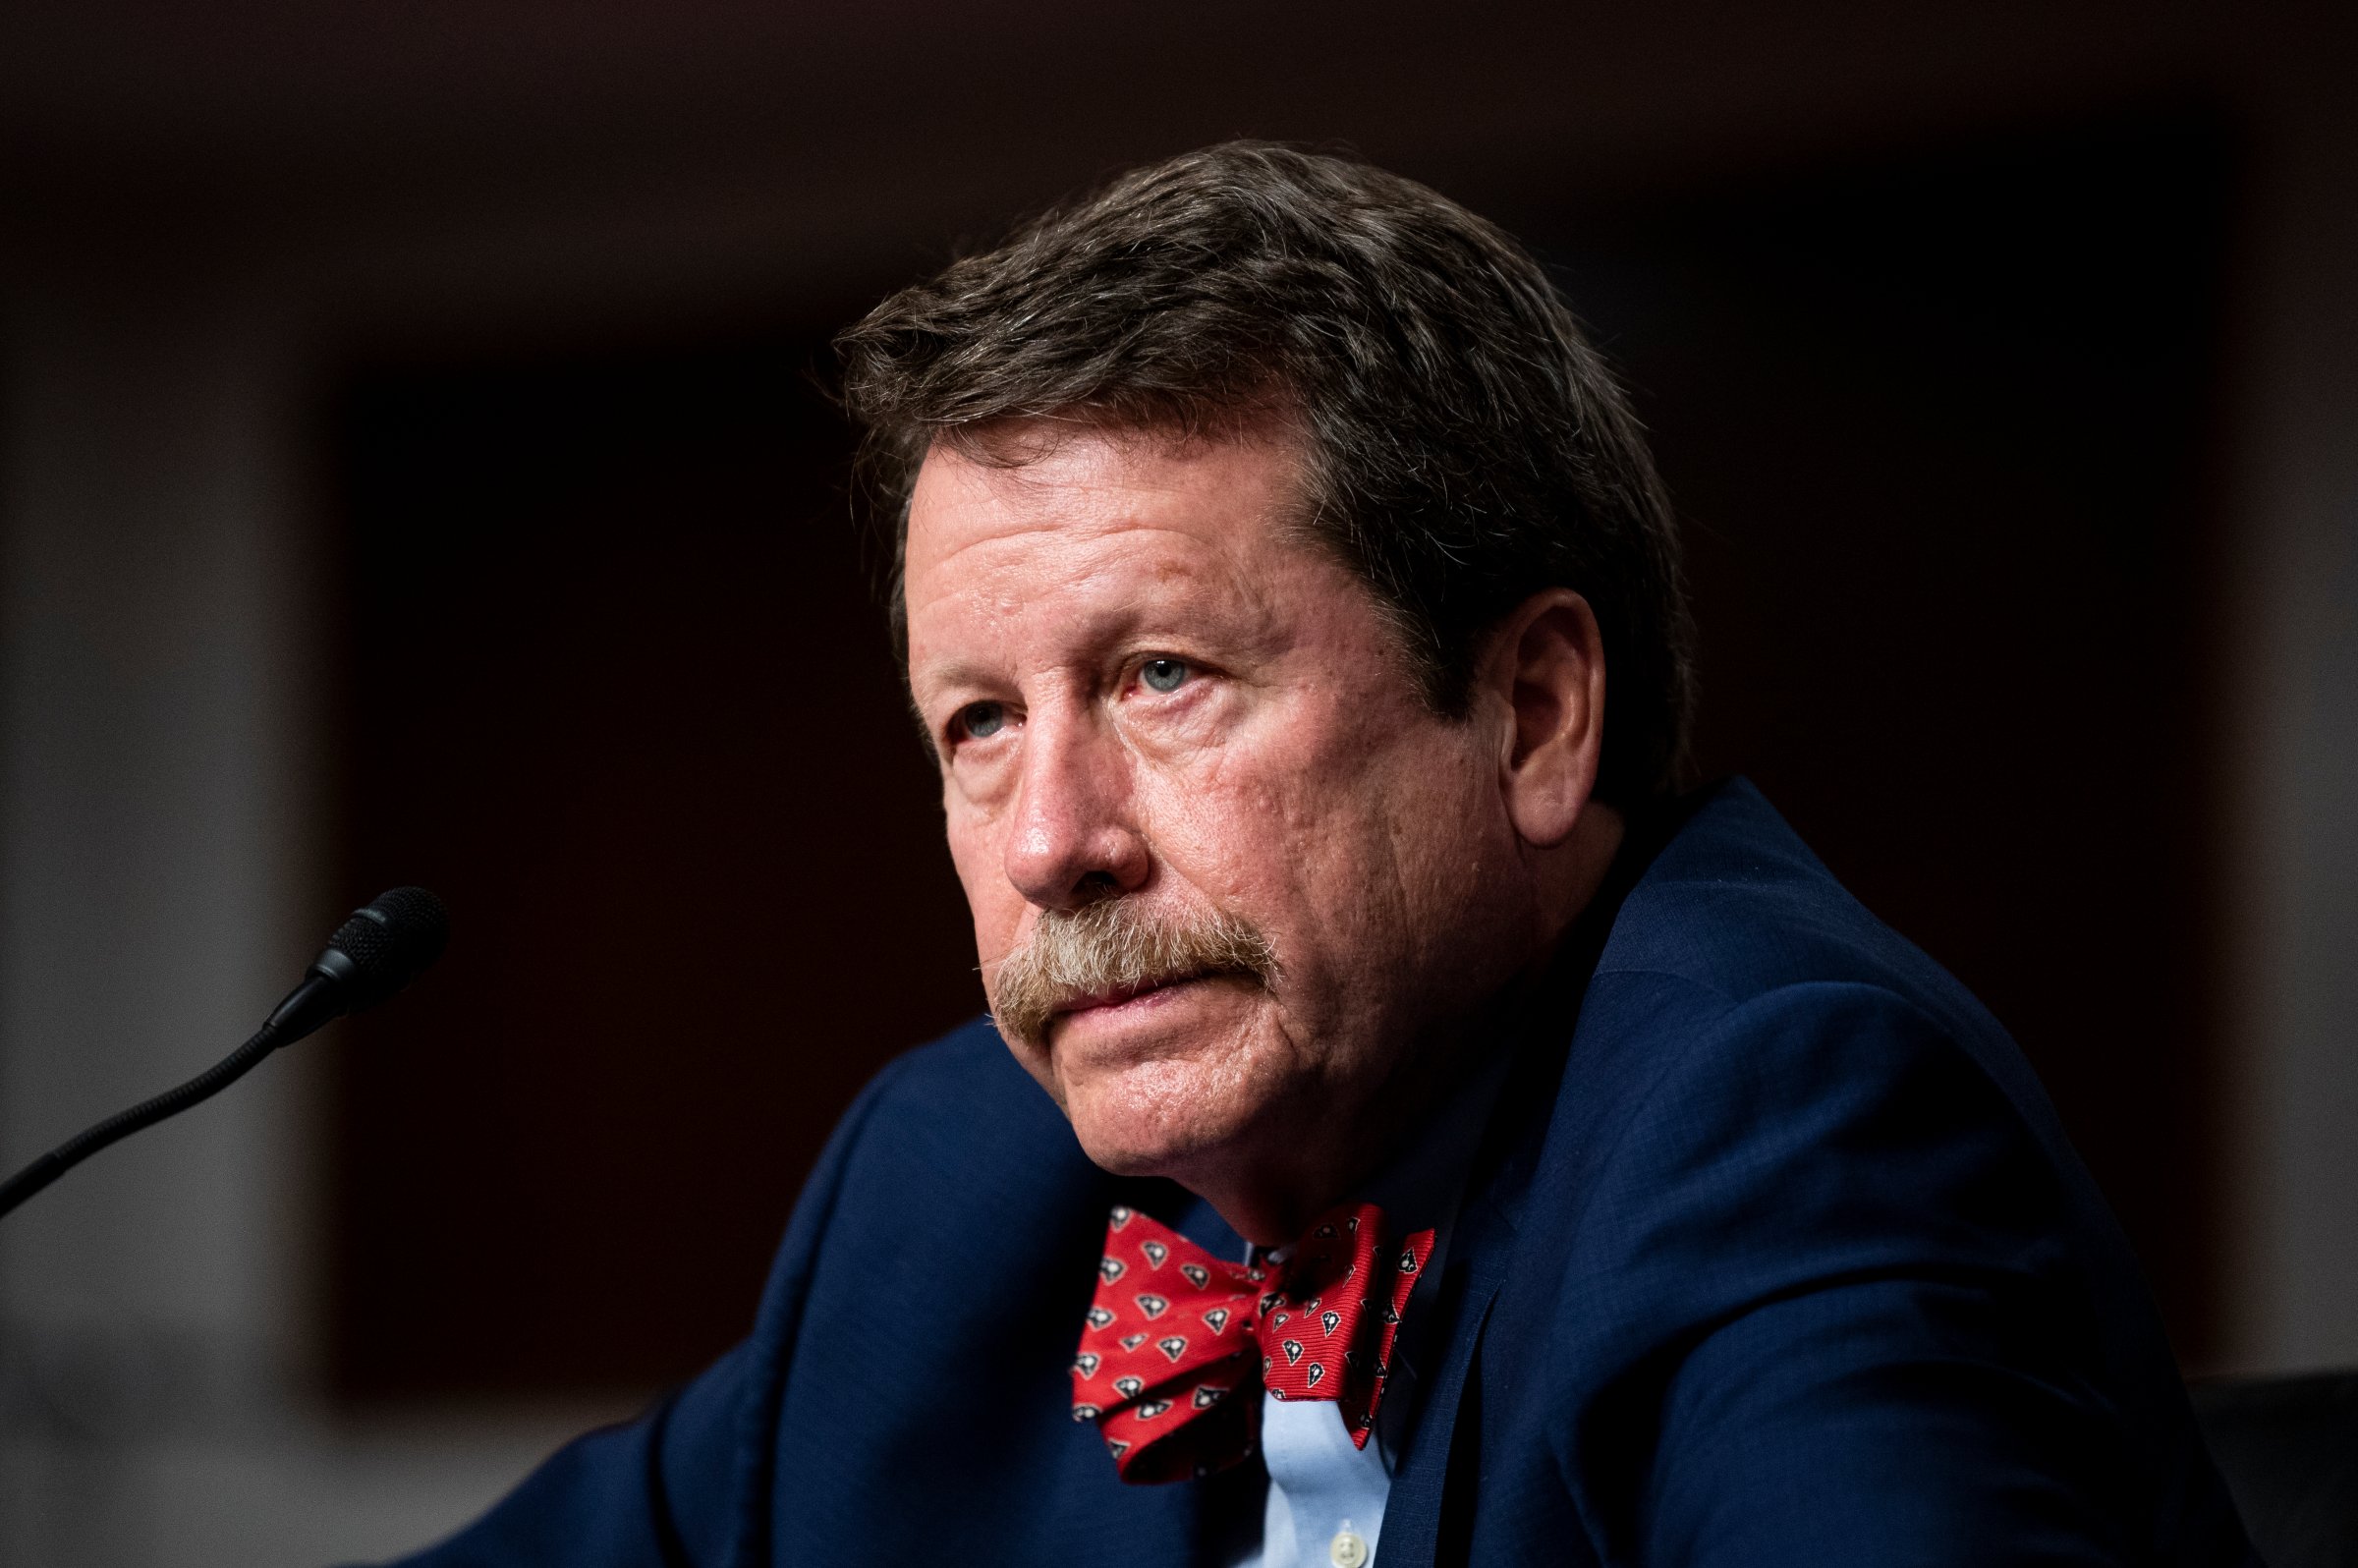 Robert Califf testifies during the Senate Health, Education, Labor and Pensions Committee hearing on the nomination to be commissioner of the Food and Drug Administration on Dec. 14, 2021.